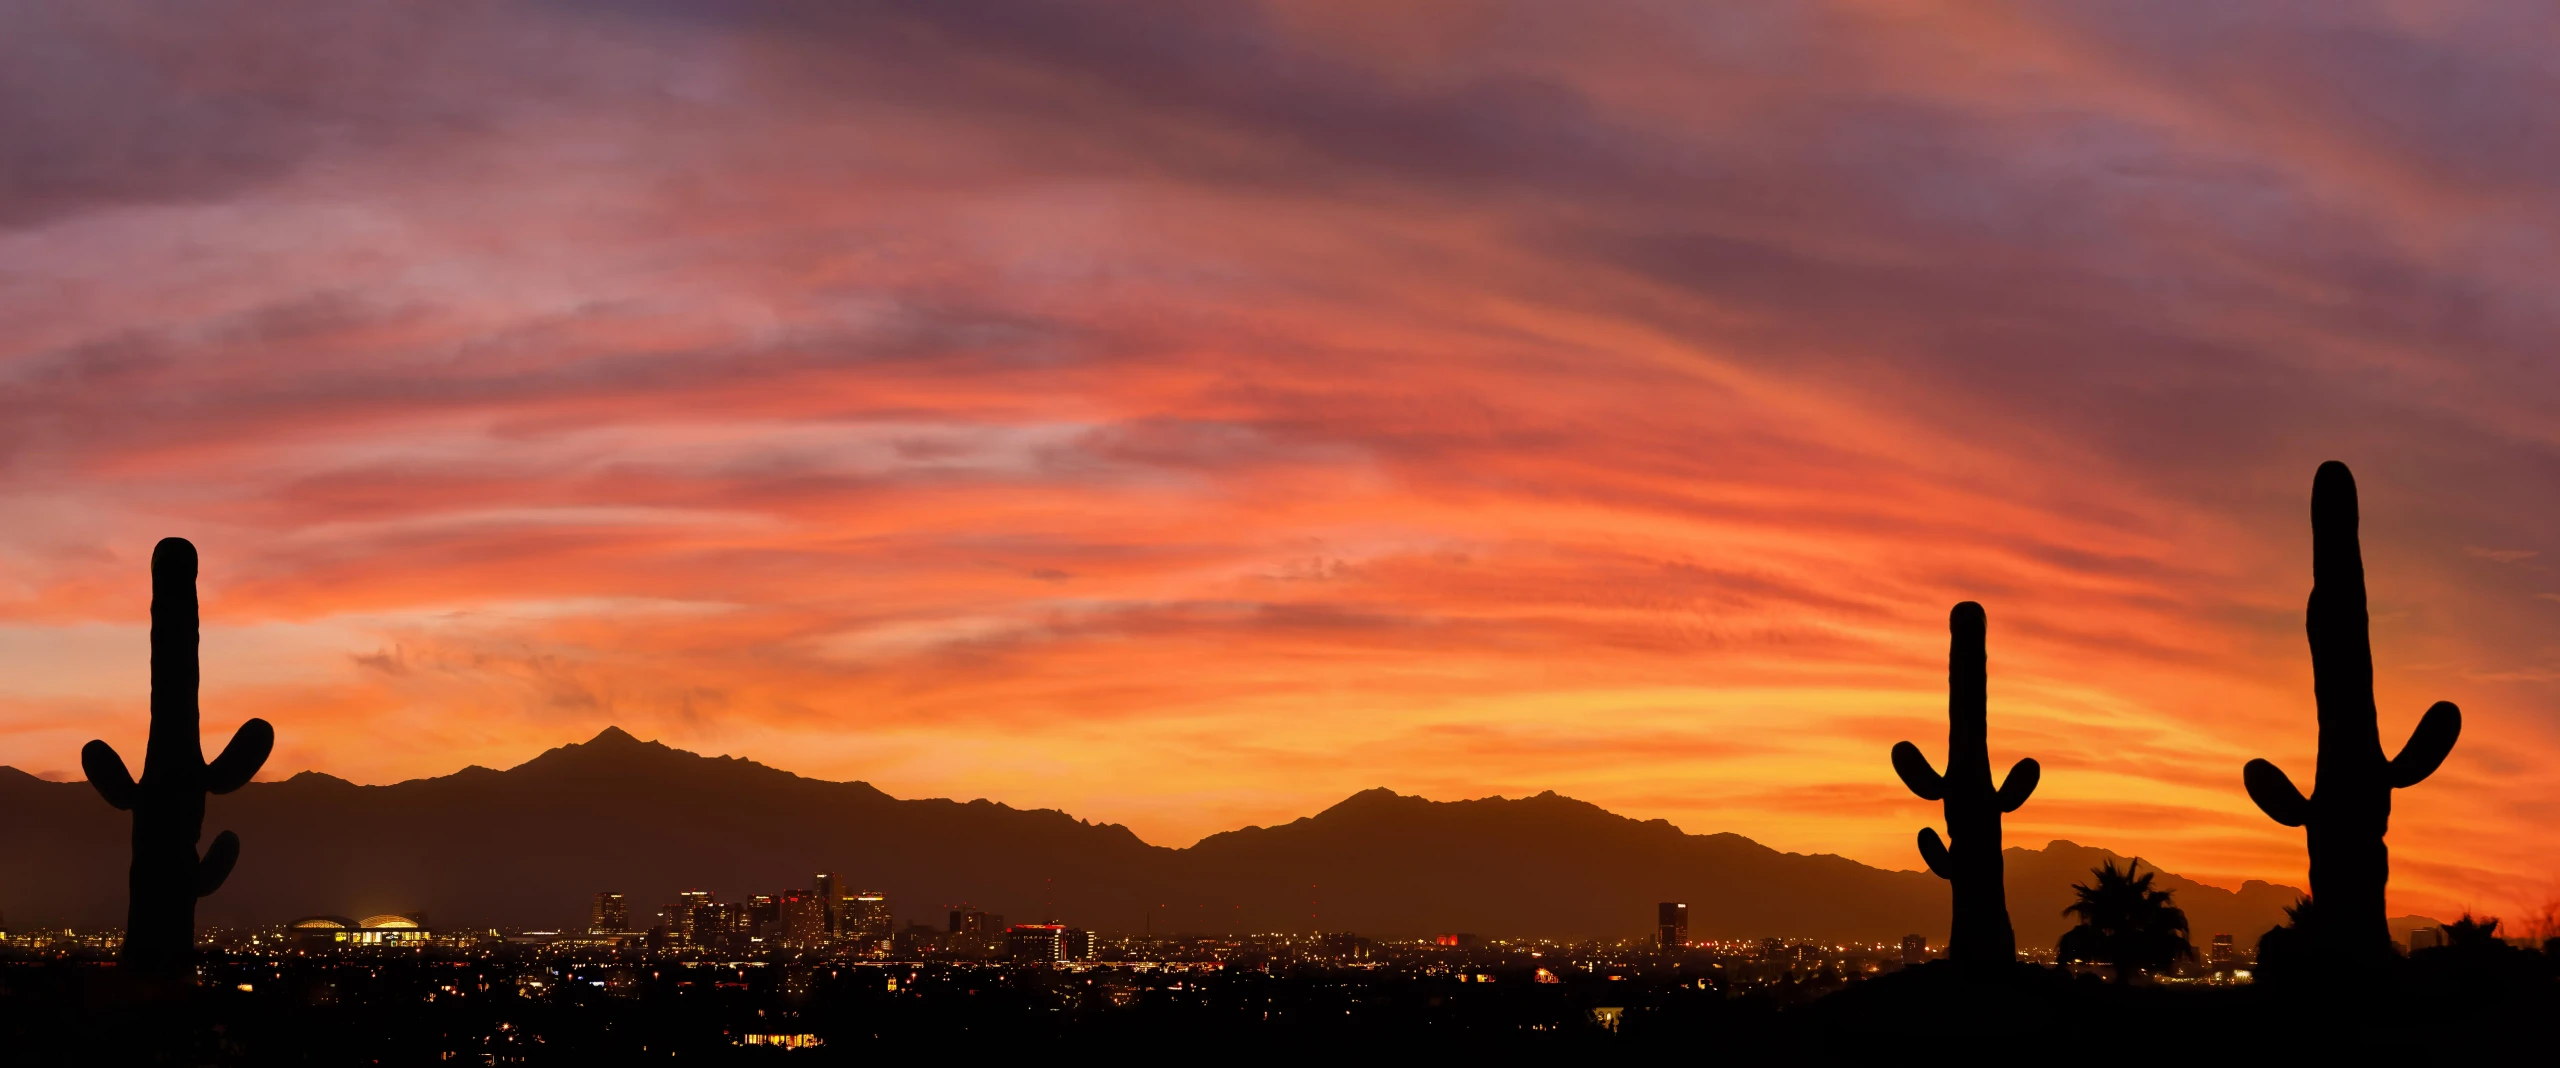 Sunset over Phoenix skyline with cacti silhouettes in the foreground